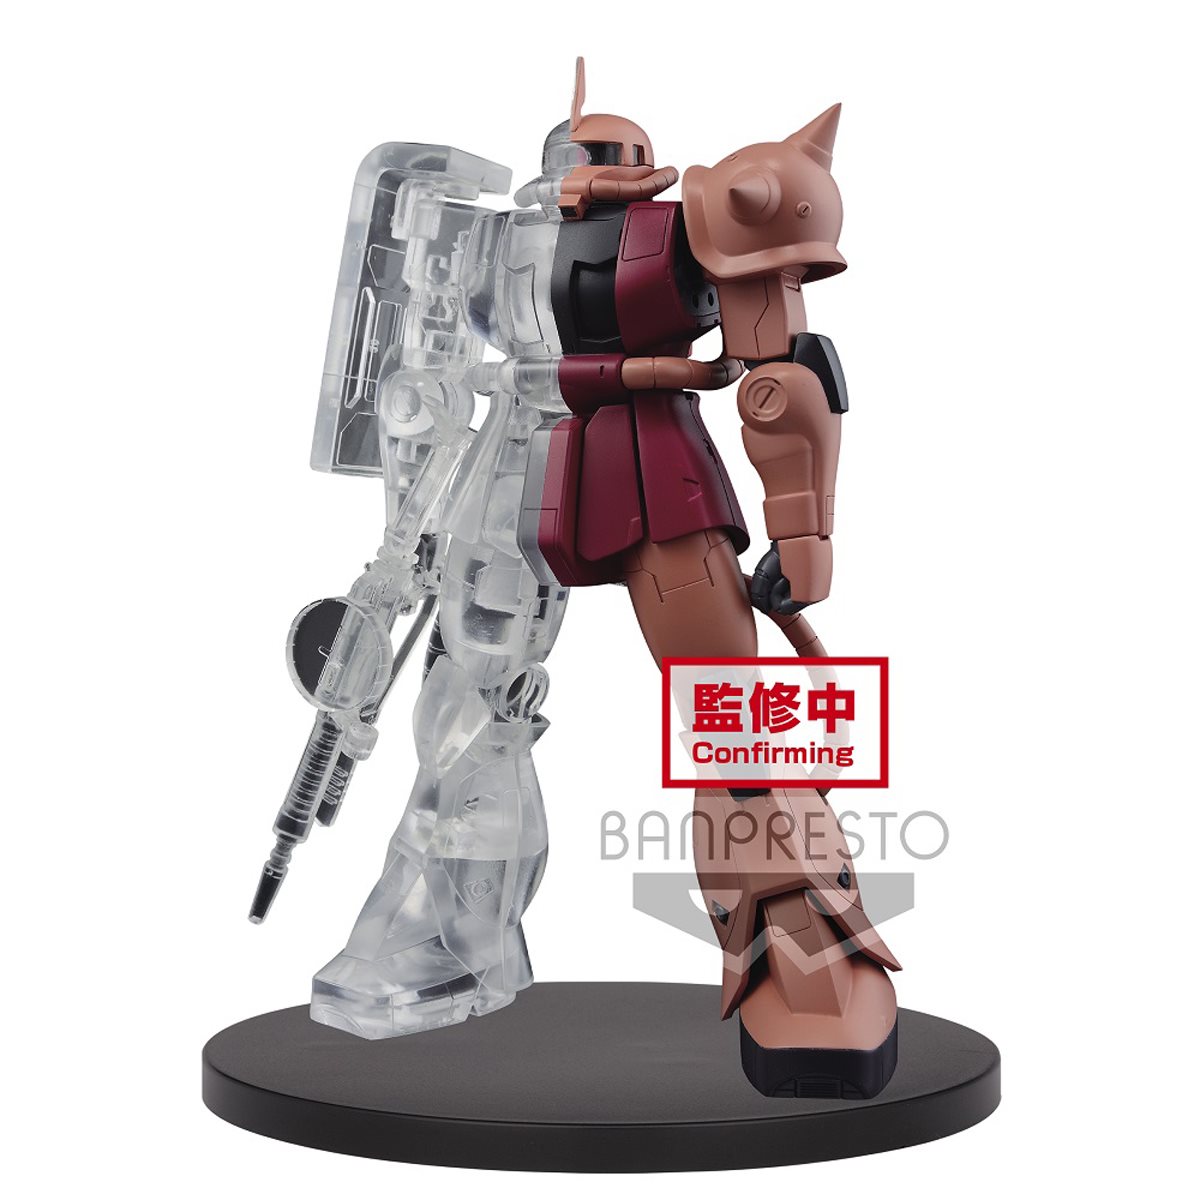 Details about   MOBILE SUIT GUNDAM ILLUSTRATIONS WORLD 3 FIGURES ZAKU RED LIMITED EDITION 